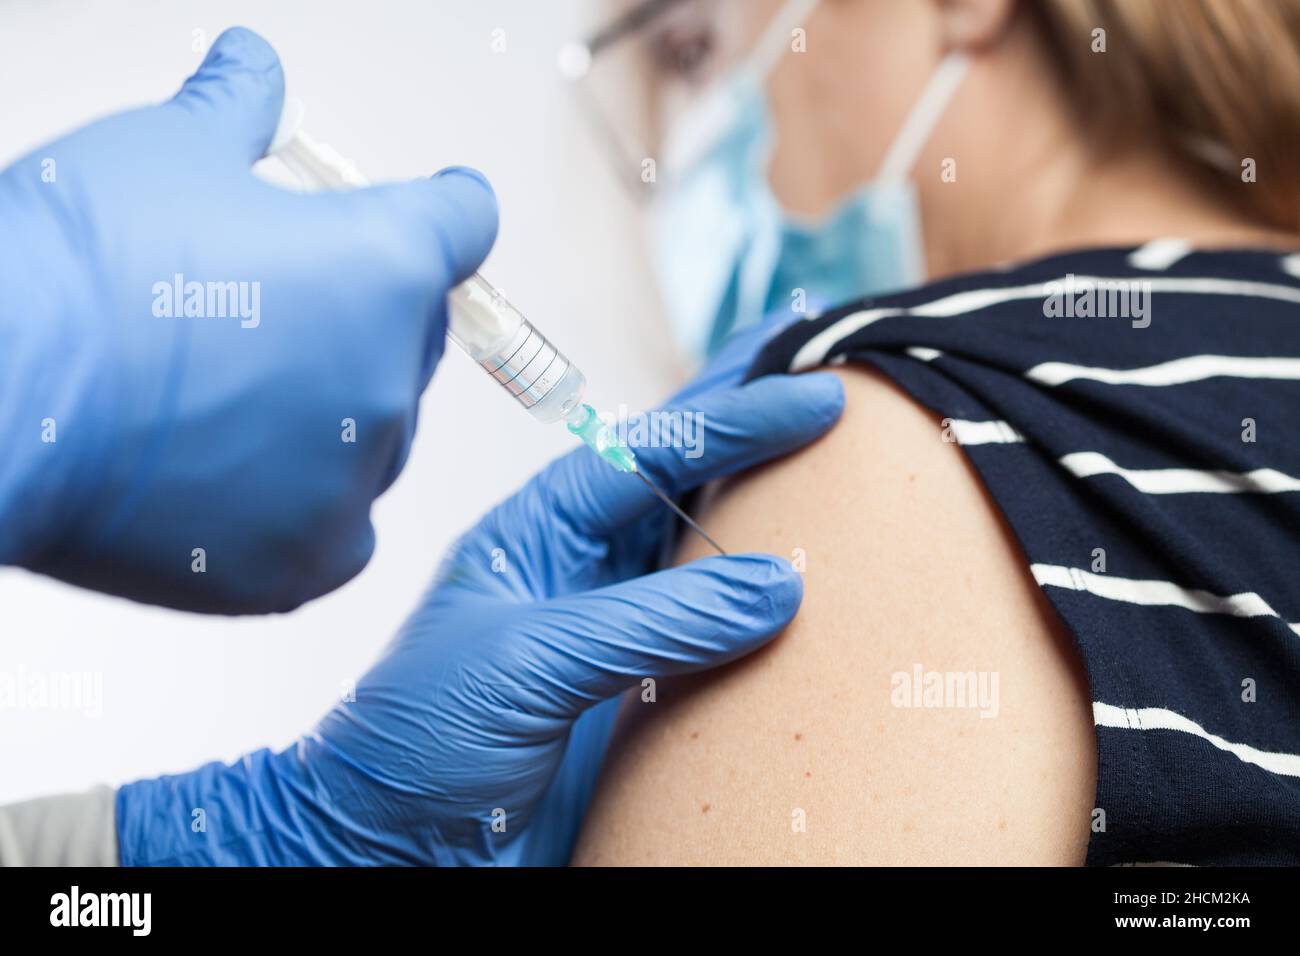 Closeup of medical worker's hands in blue protective gloves injecting vaccine booster shot into elderly patient's shoulder,Coronavirus vaccination Stock Photo